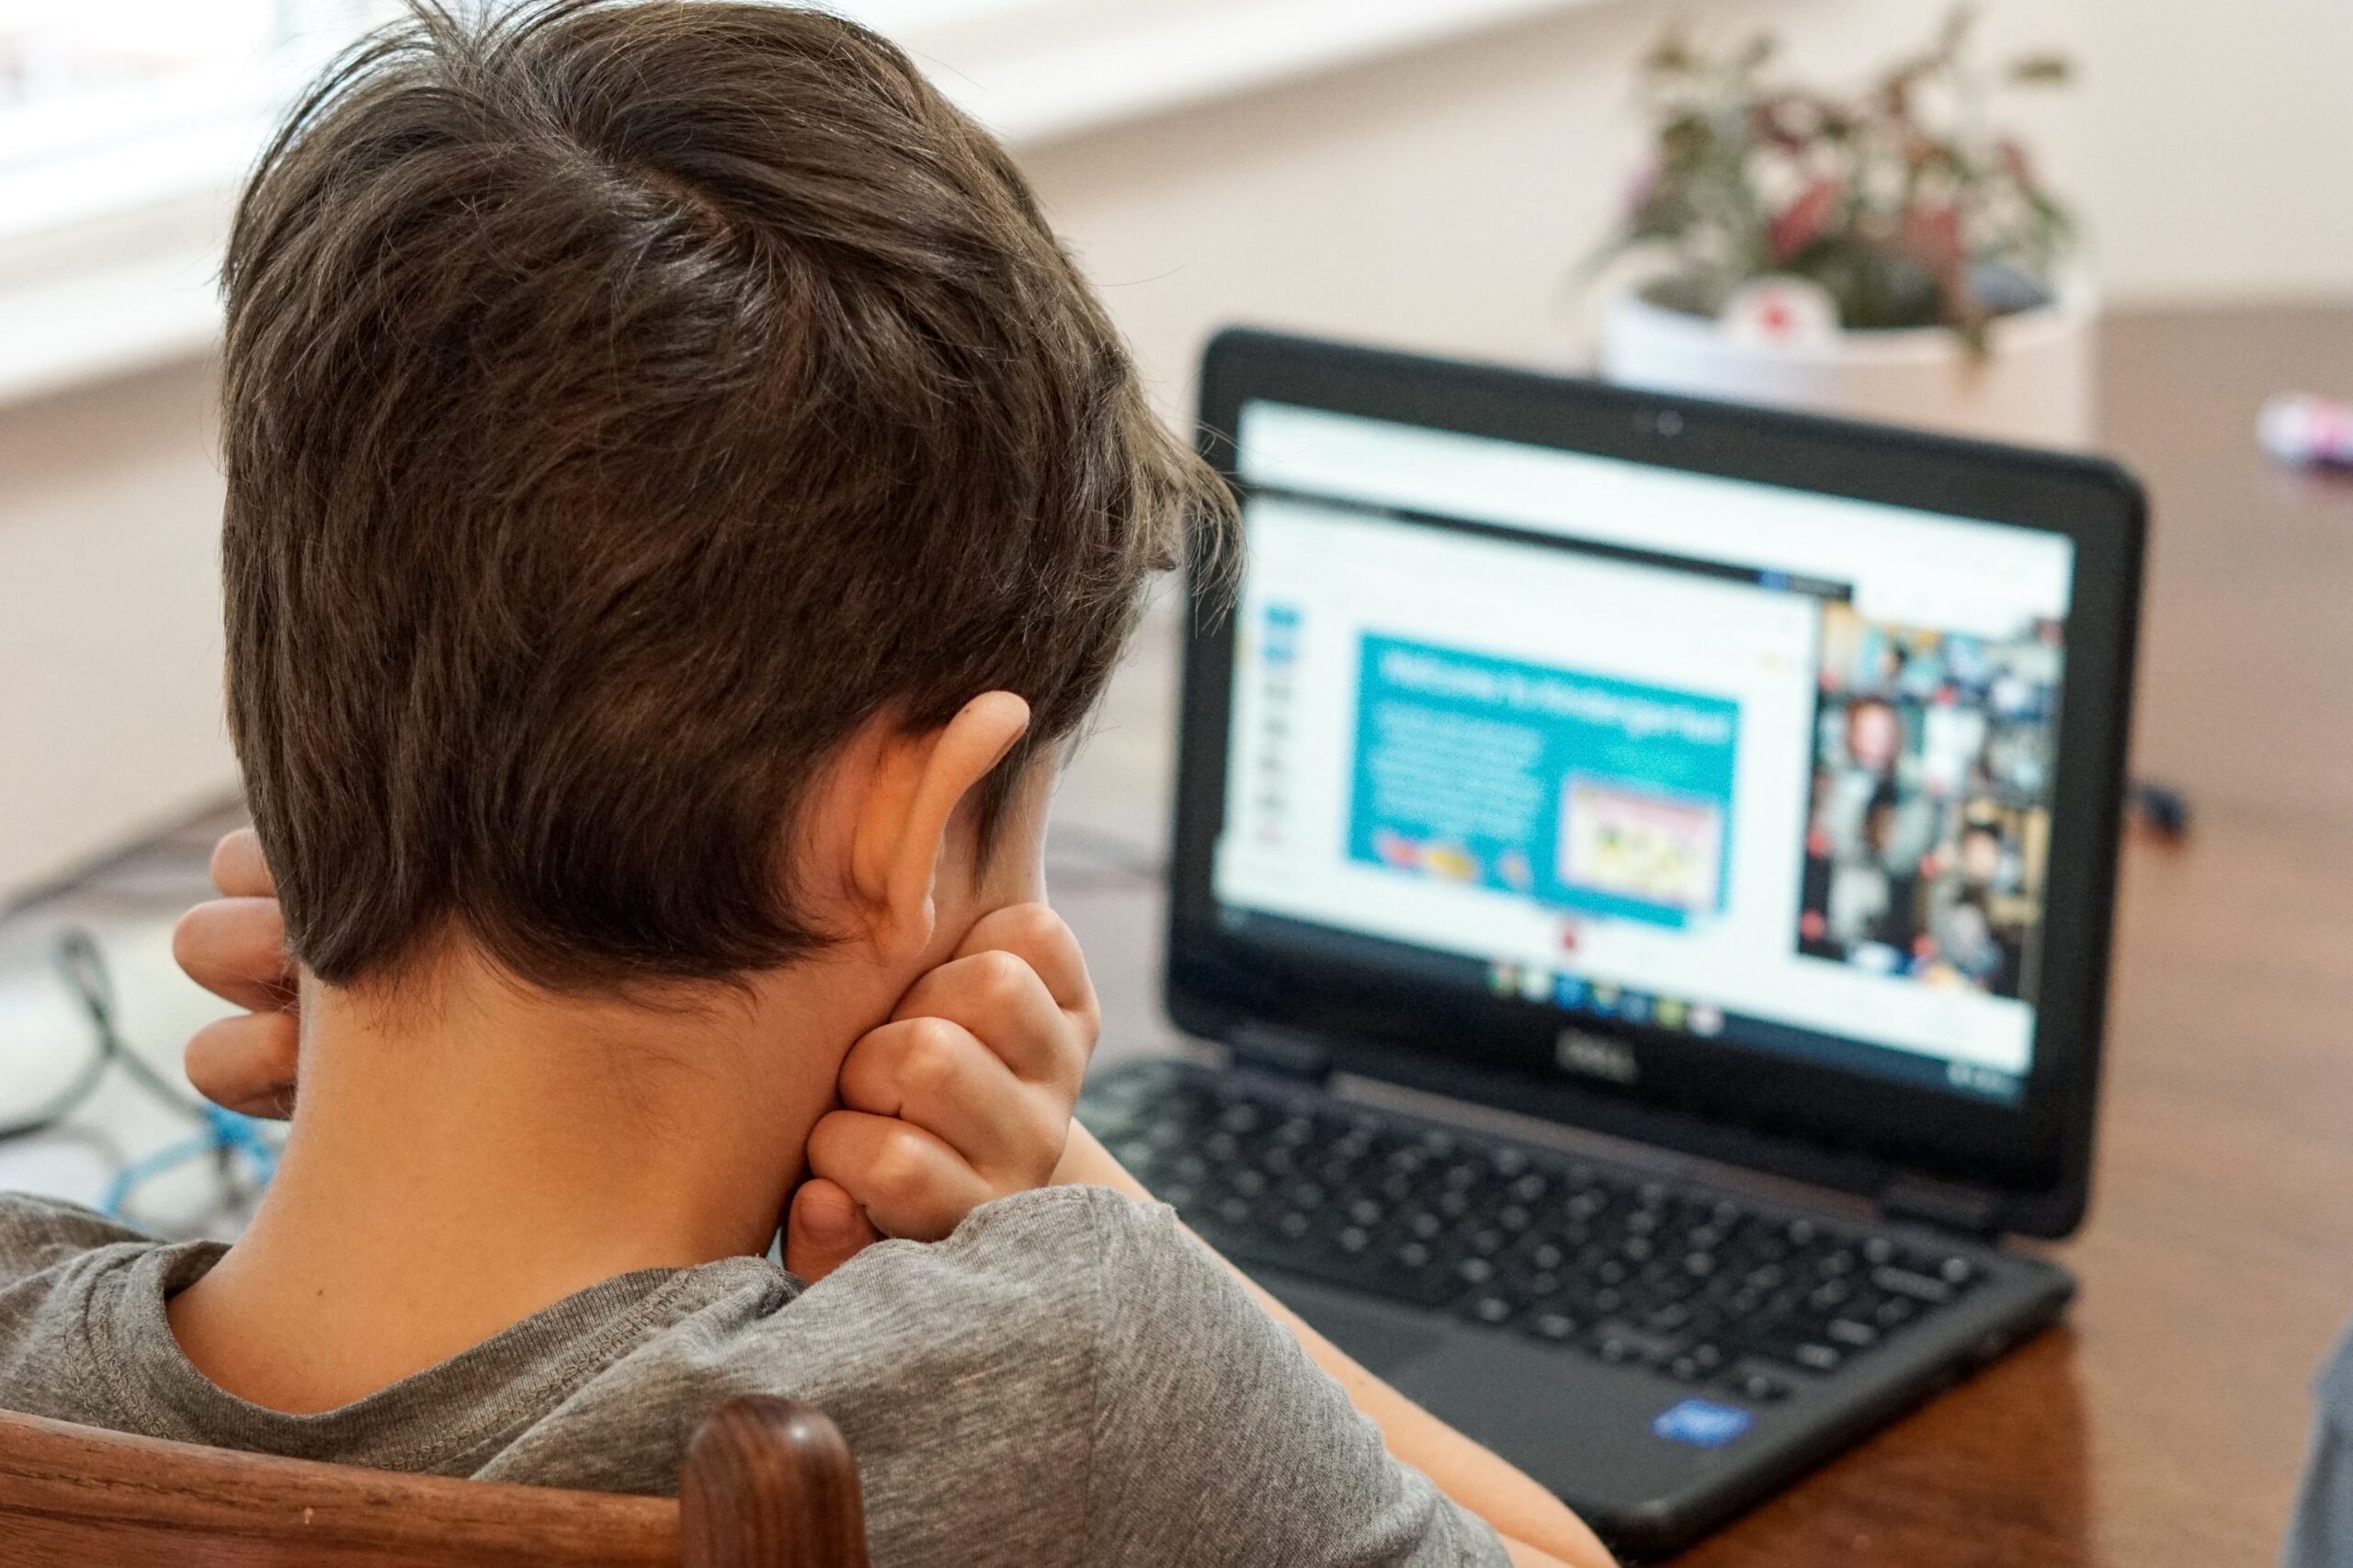 How to Protect Your Kids Online